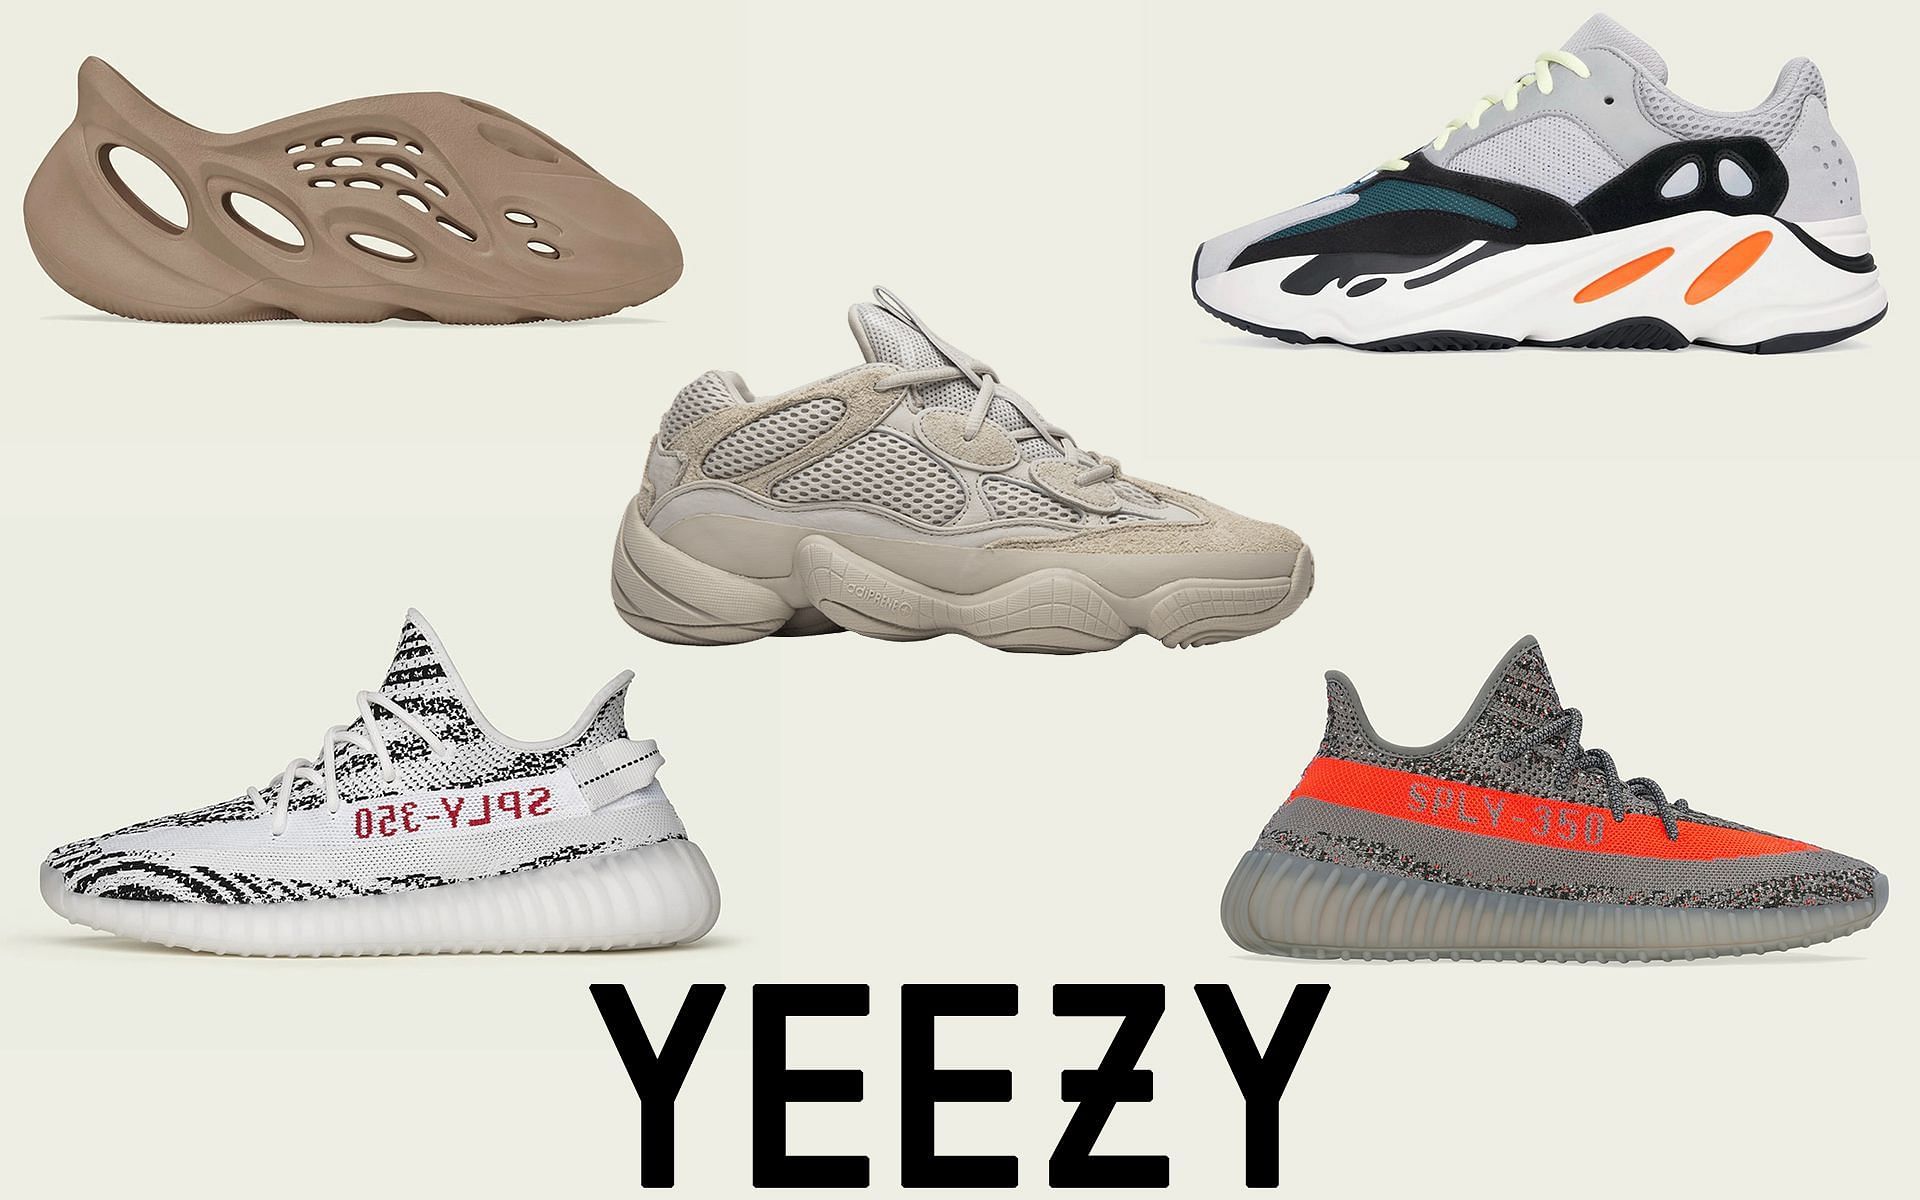 5 best Adidas Yeezy sneakers of all time